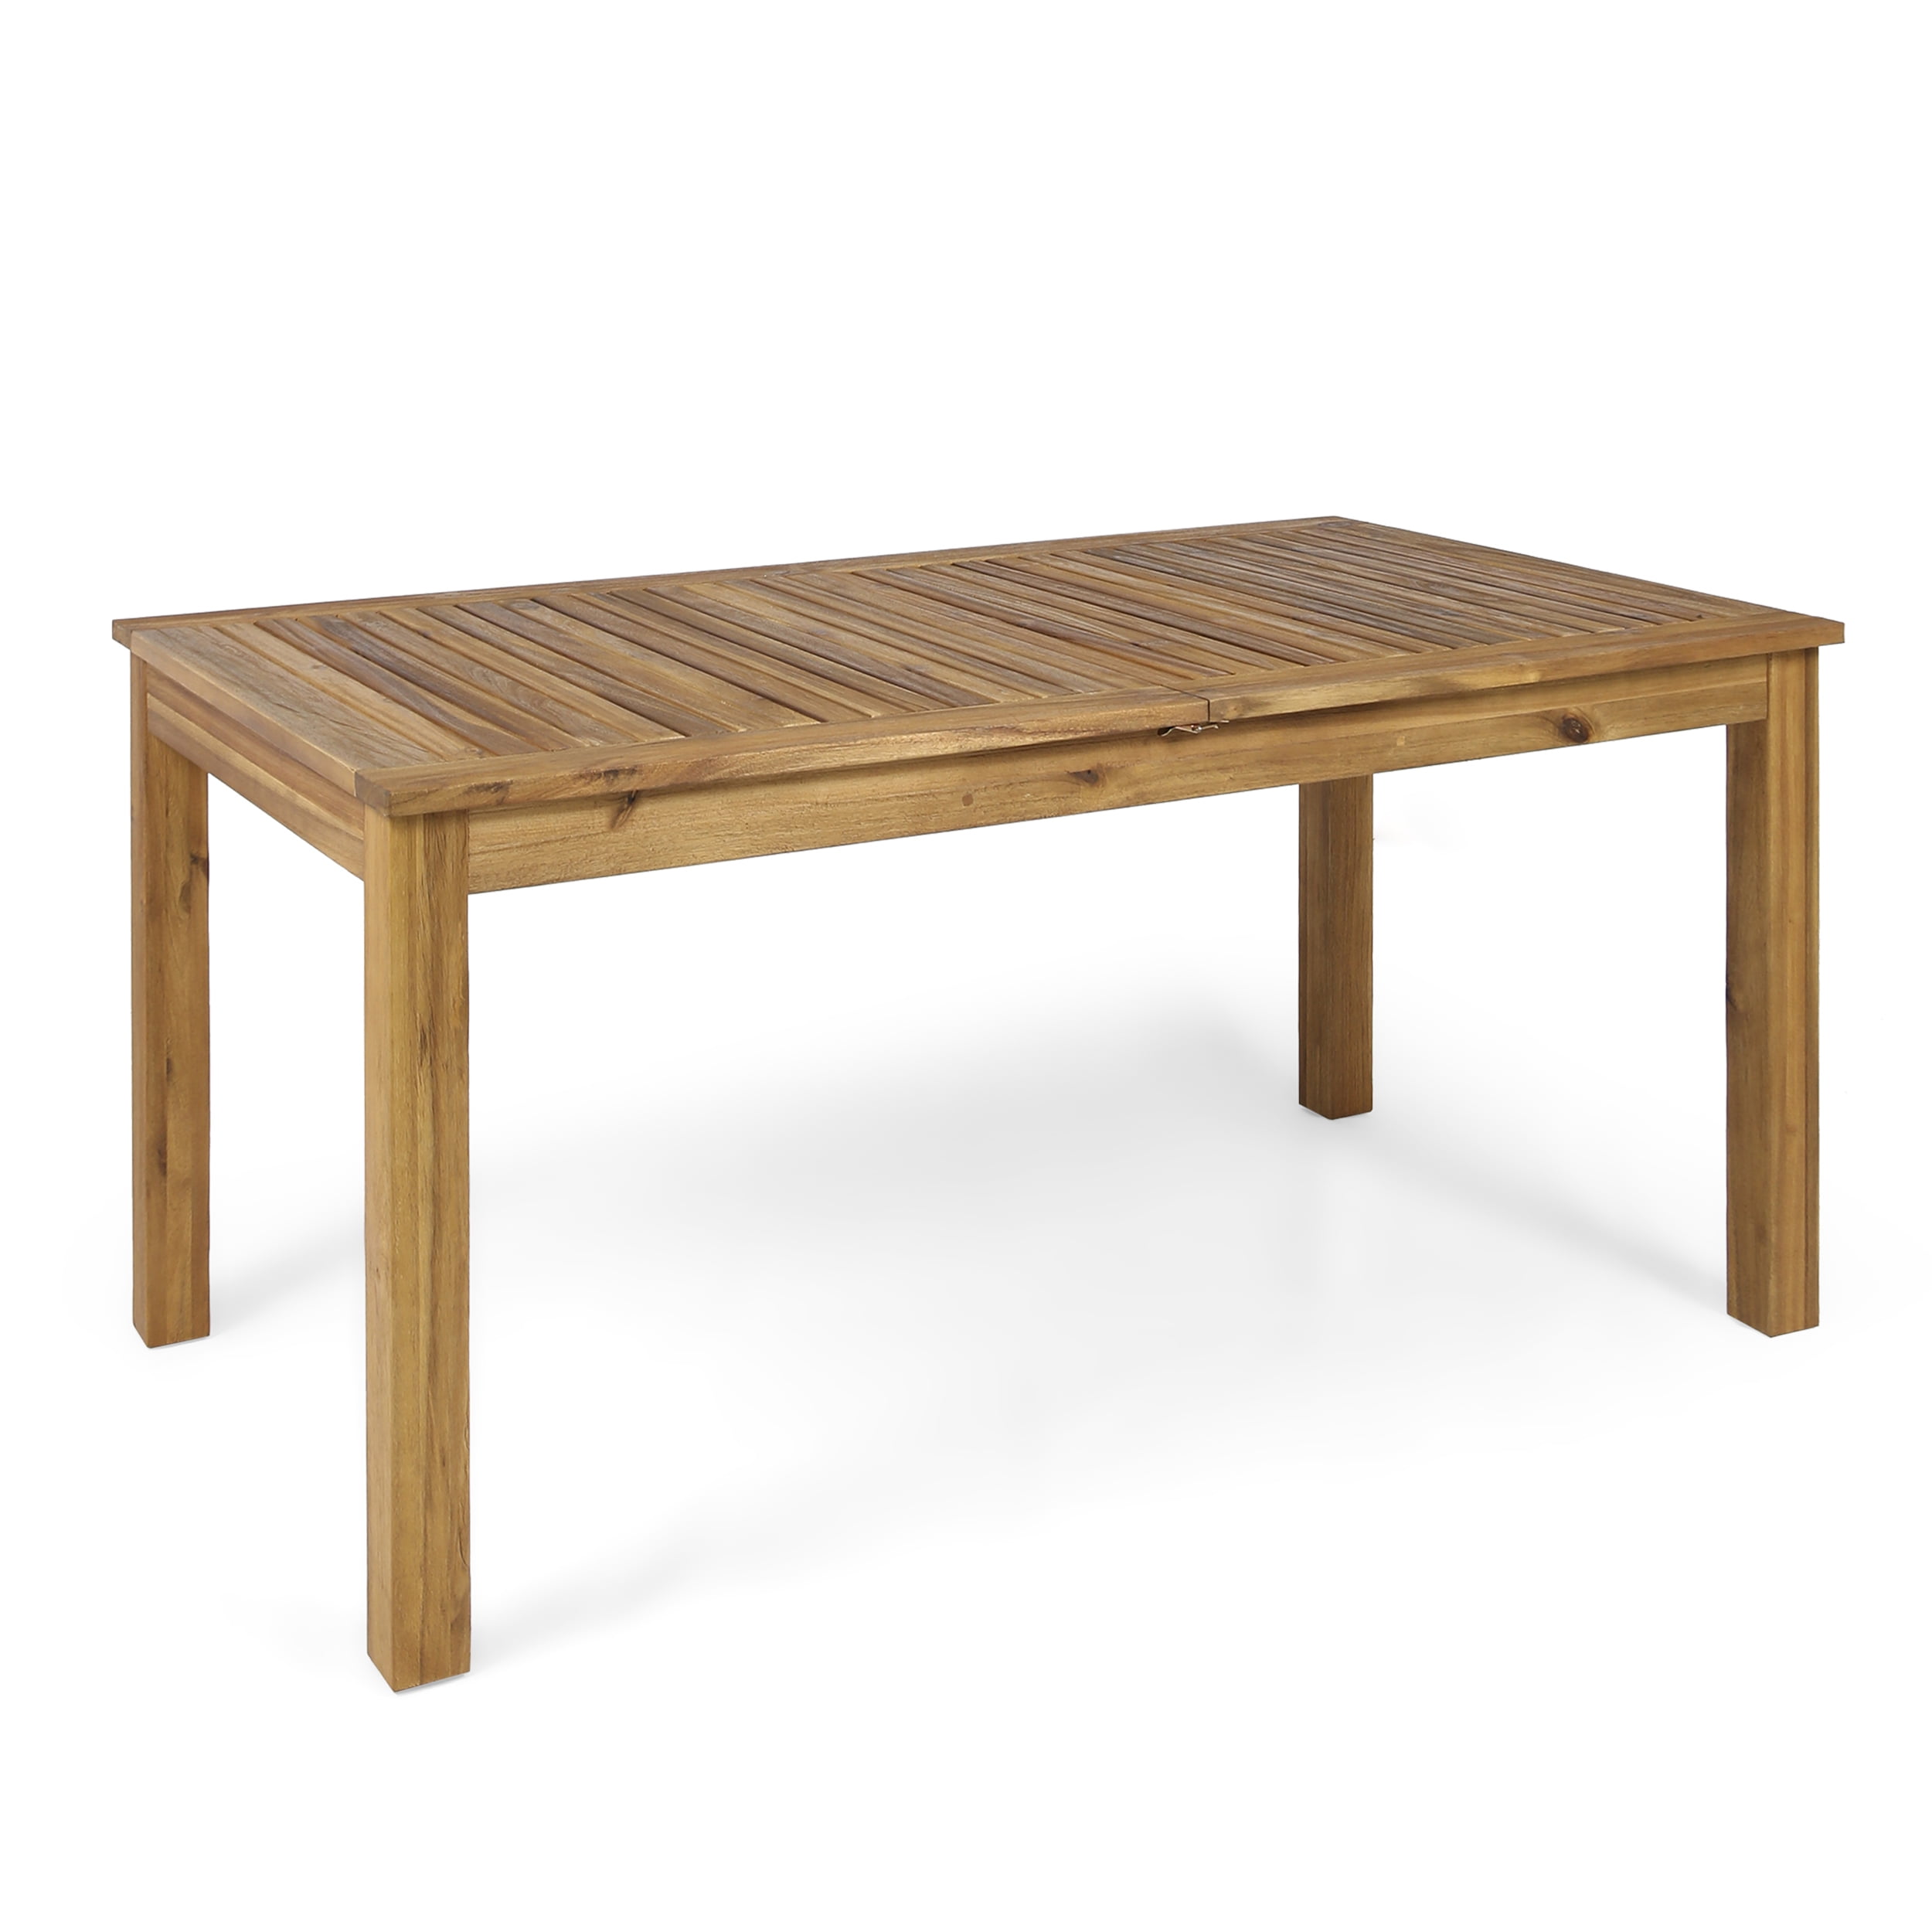 Best Outdoor Wooden Dining Table - Acacia Wood 69 x 32 inch Outdoor